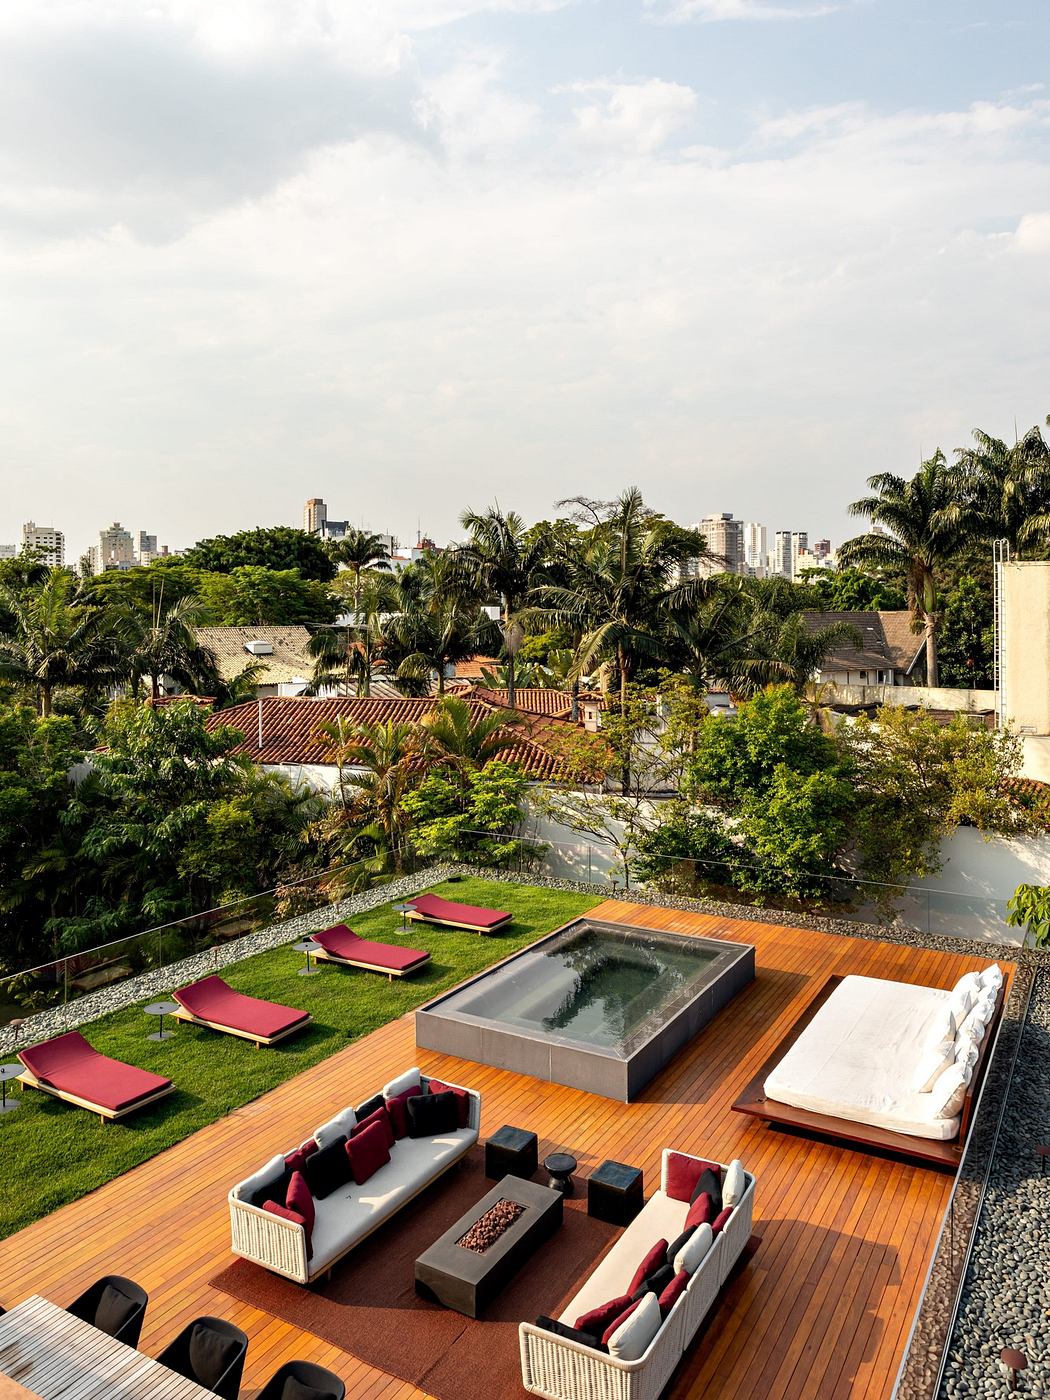 Rooftop terrace with chic lounge area overlooking a cityscape.